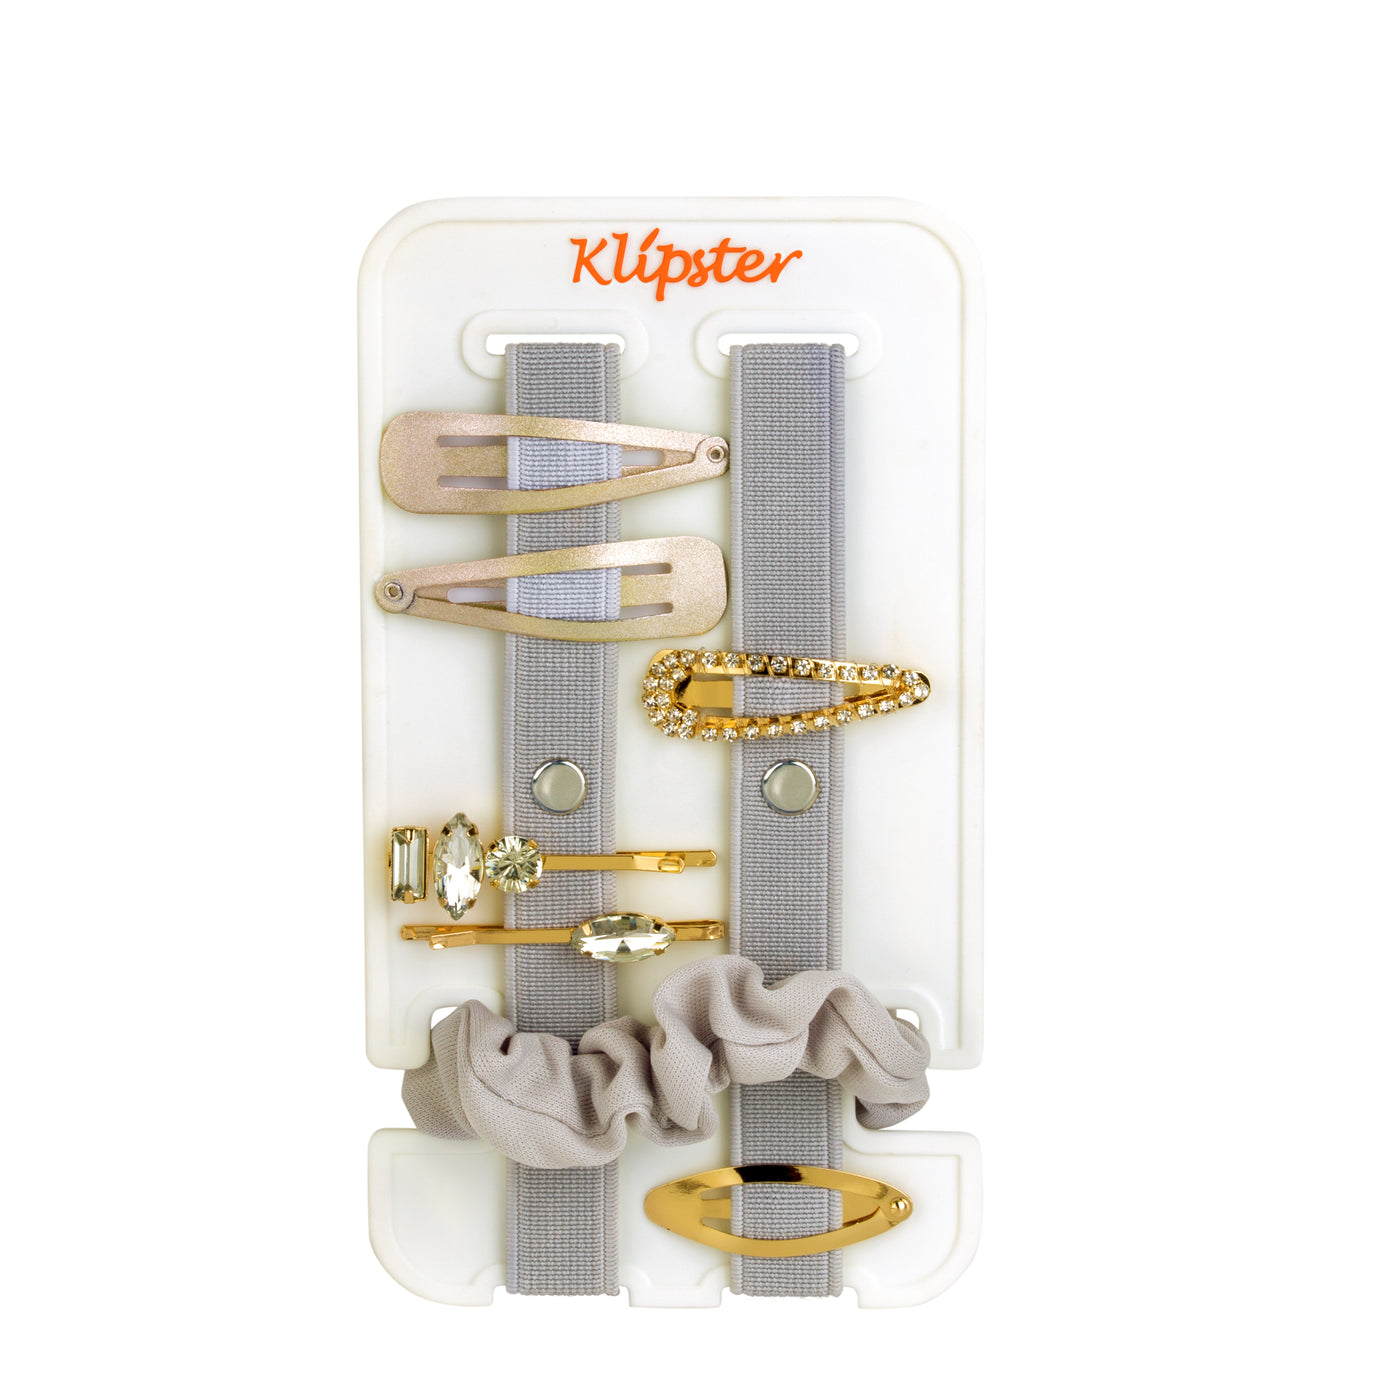 Gold clips on the Mini Klipster hair accessories organizer